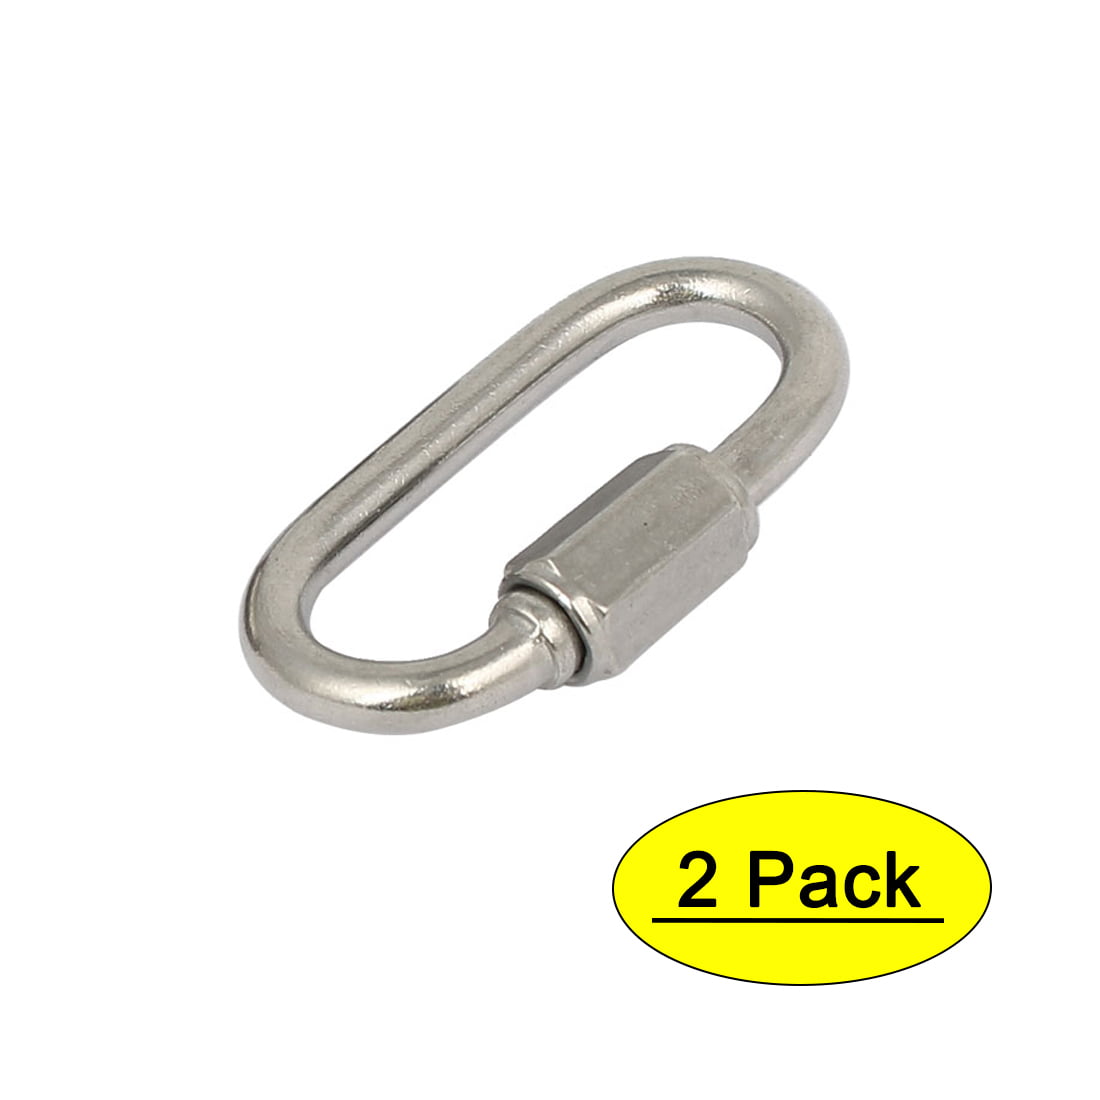 10Pieces M3.5 304 Stainless Steel Quick Link Chain Fastener Carabiner Lock 